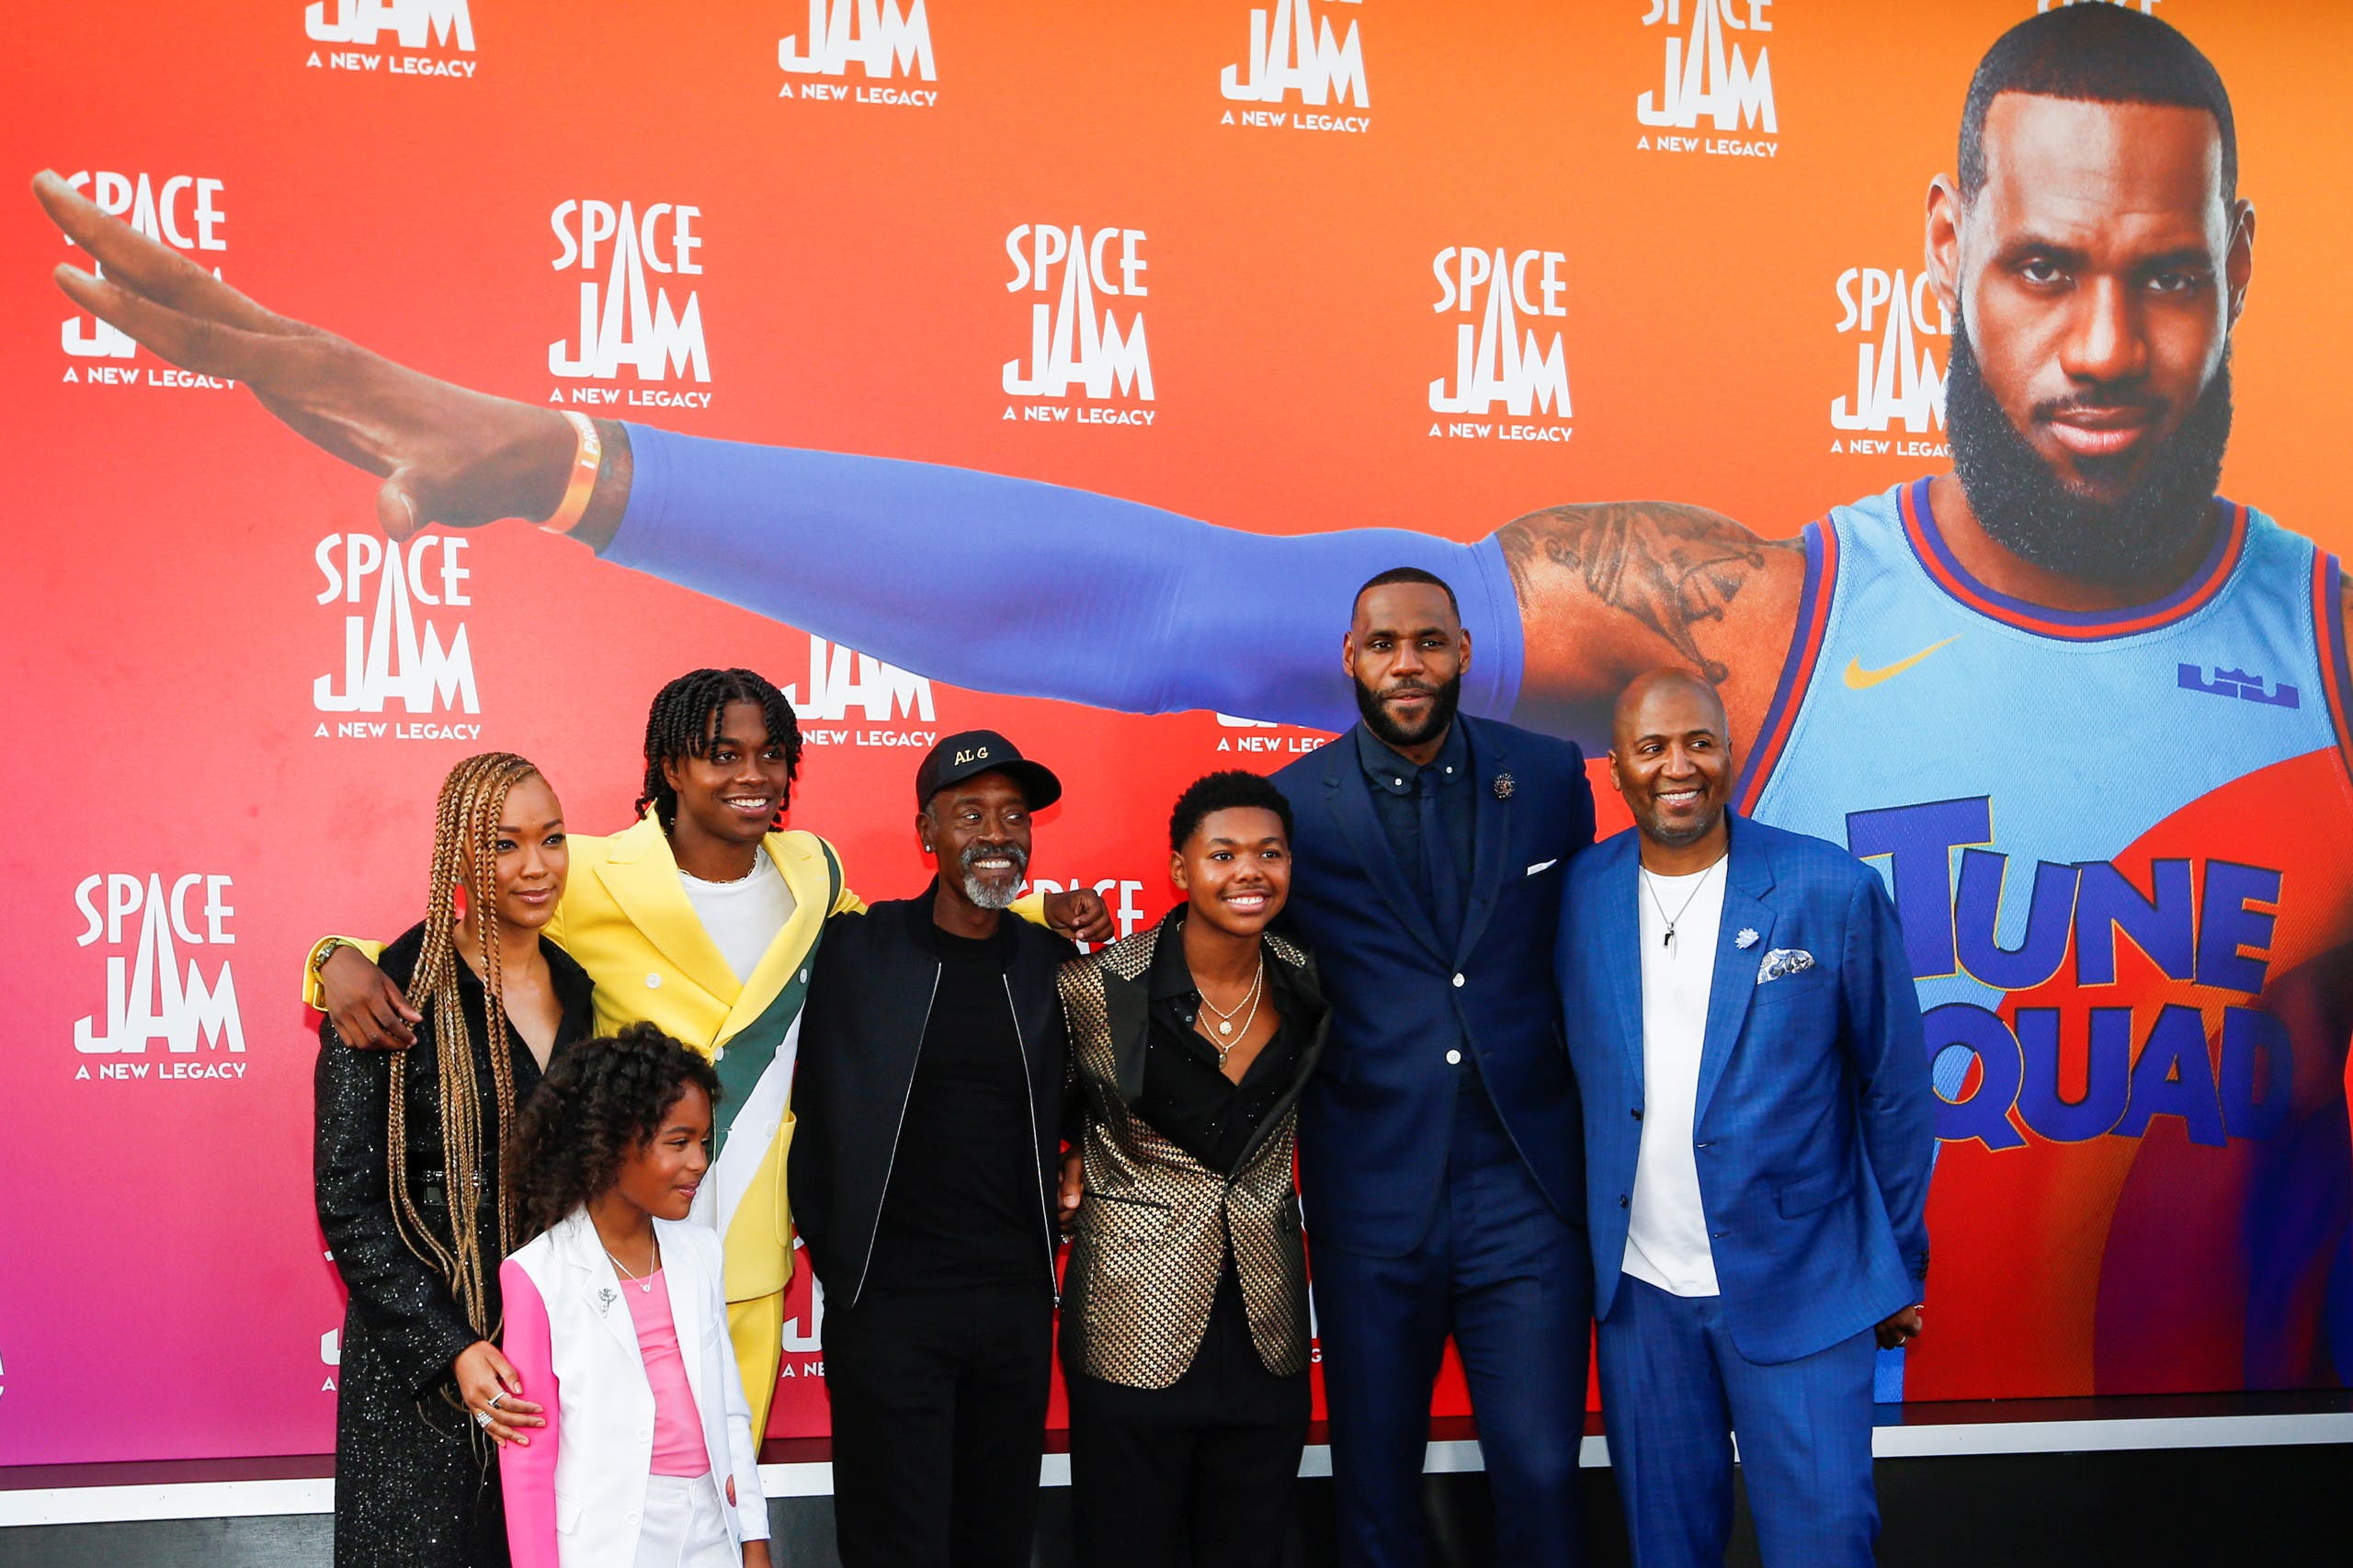 Cast member Lebron James attends the premiere for the film Space Jam: A New Legacy in Los Angeles, California, U.S. July 12, 2021. REUTERS/Mario Anzuoni